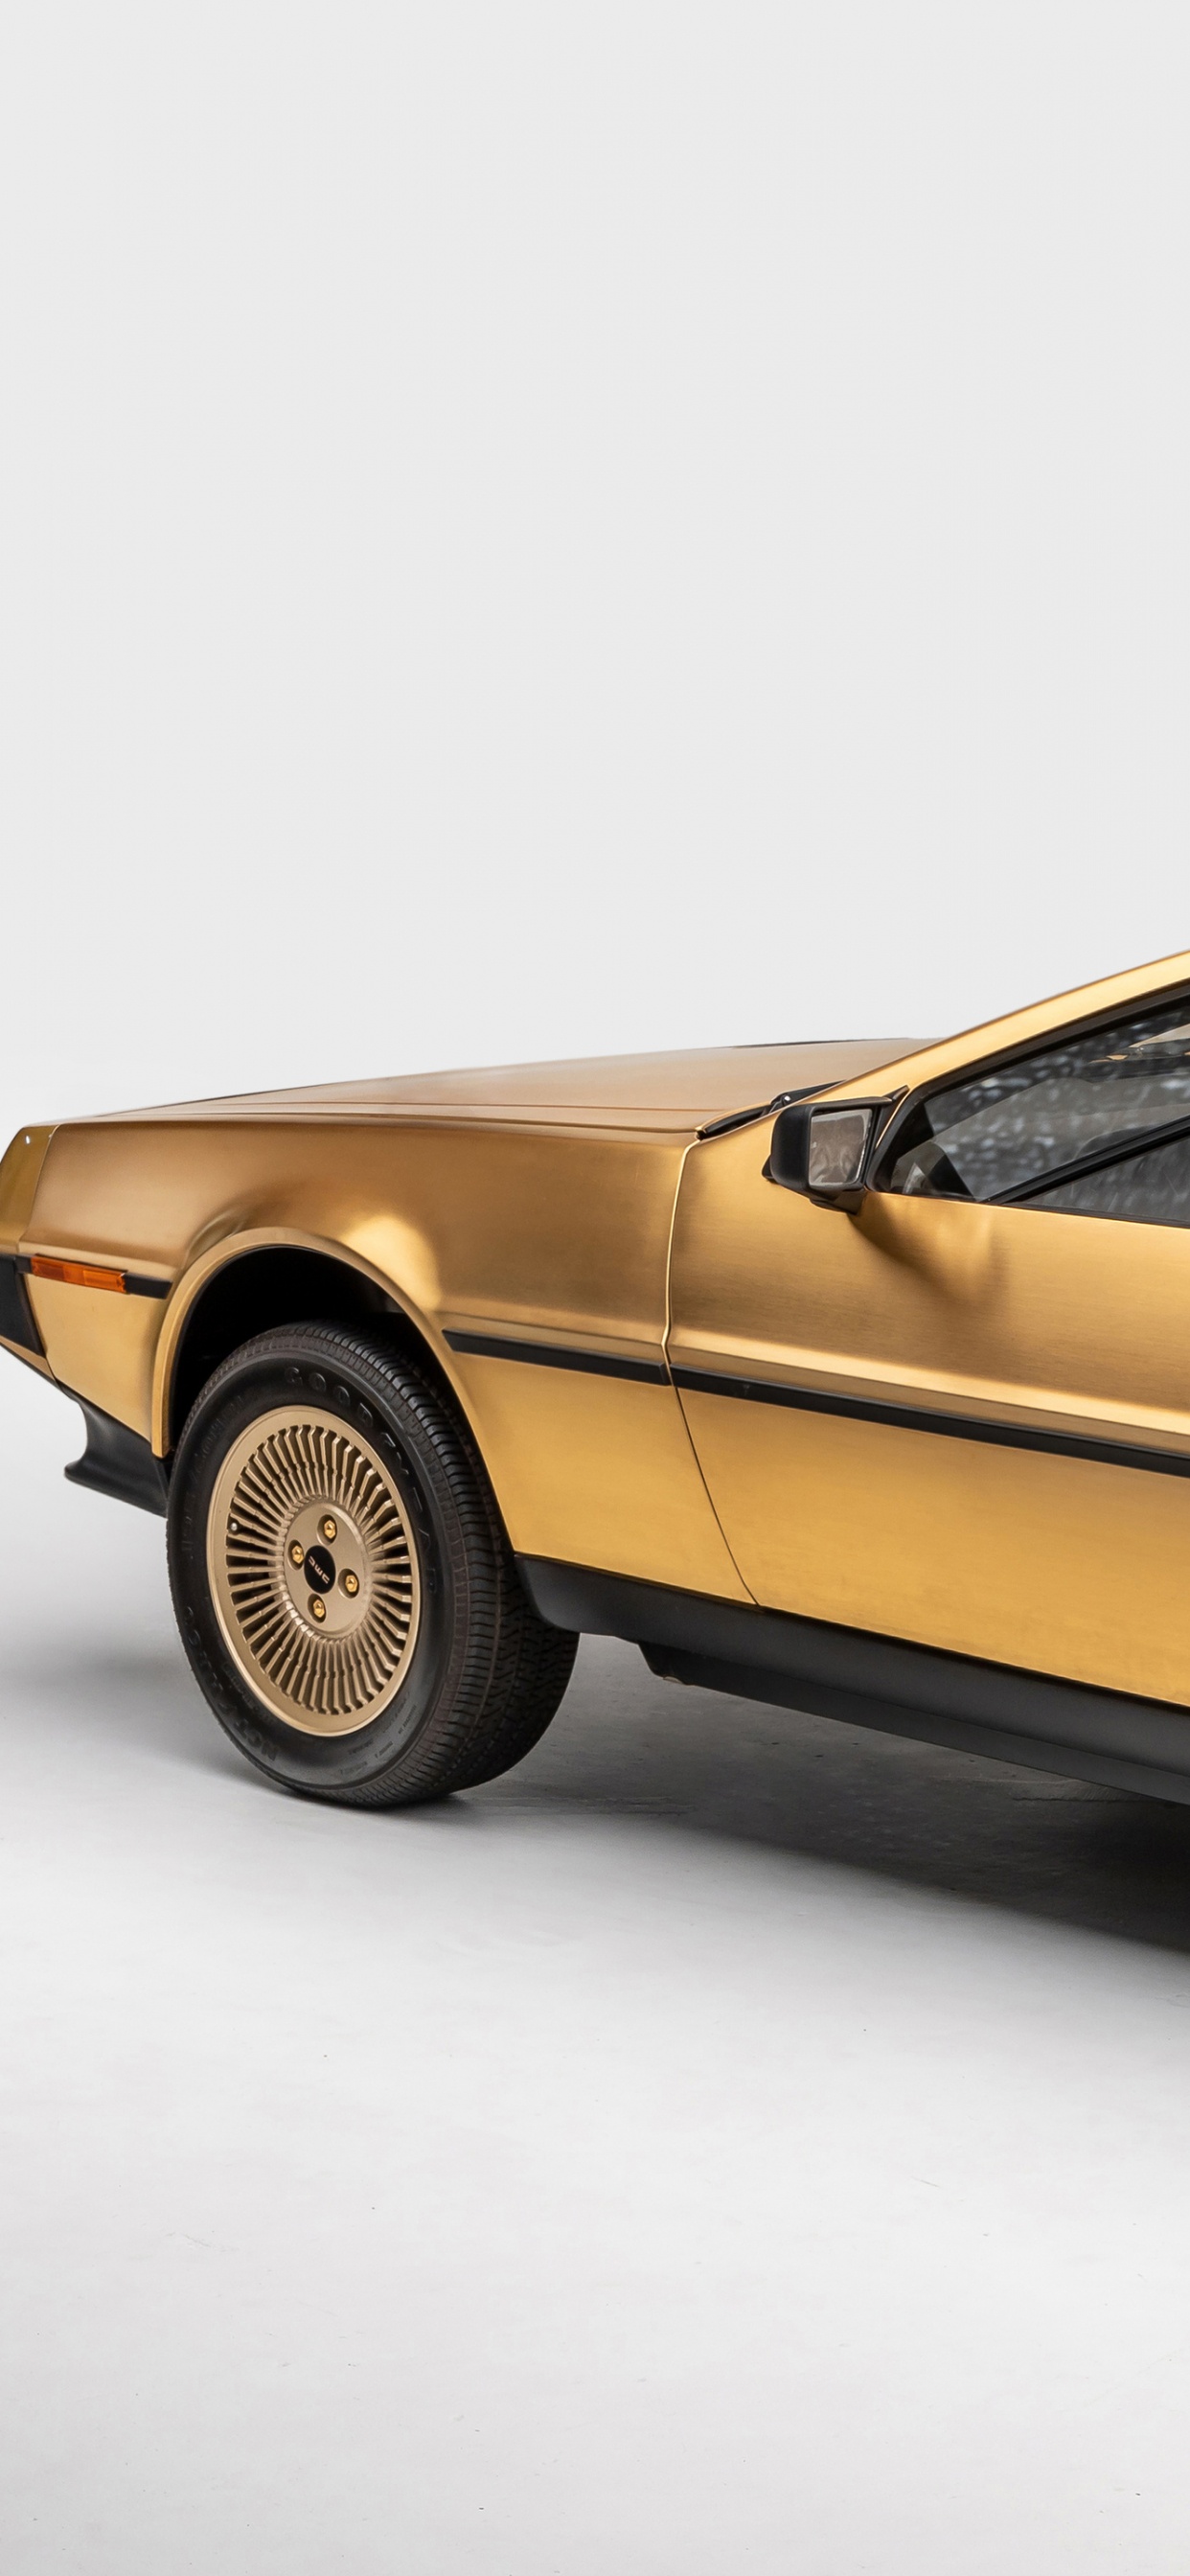 Delorean Dmc 12, DMC DeLorean, DeLorean, DeLorean Motor Company, Roue. Wallpaper in 1242x2688 Resolution